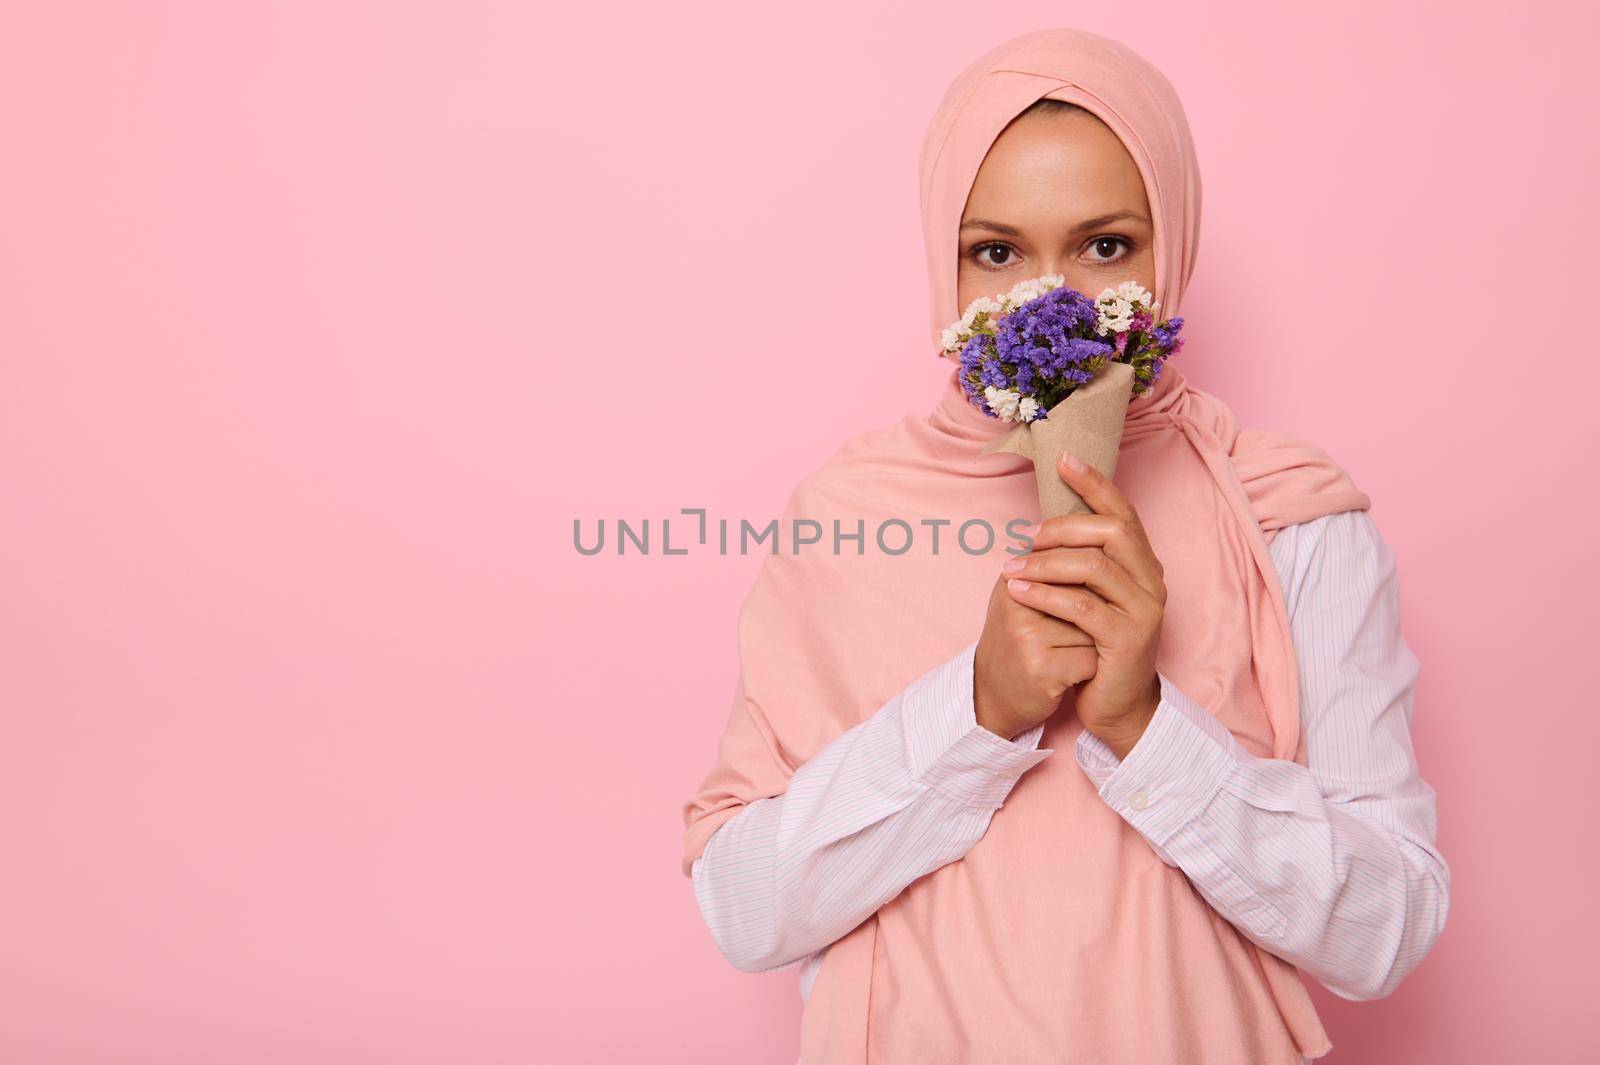 Confident portrait of young charming Arab Muslim woman in pink hijab with beautiful dark eyes, attractive gaze, looking at camera, covers half of her face and mouth with a craft bouquet of wildflowers